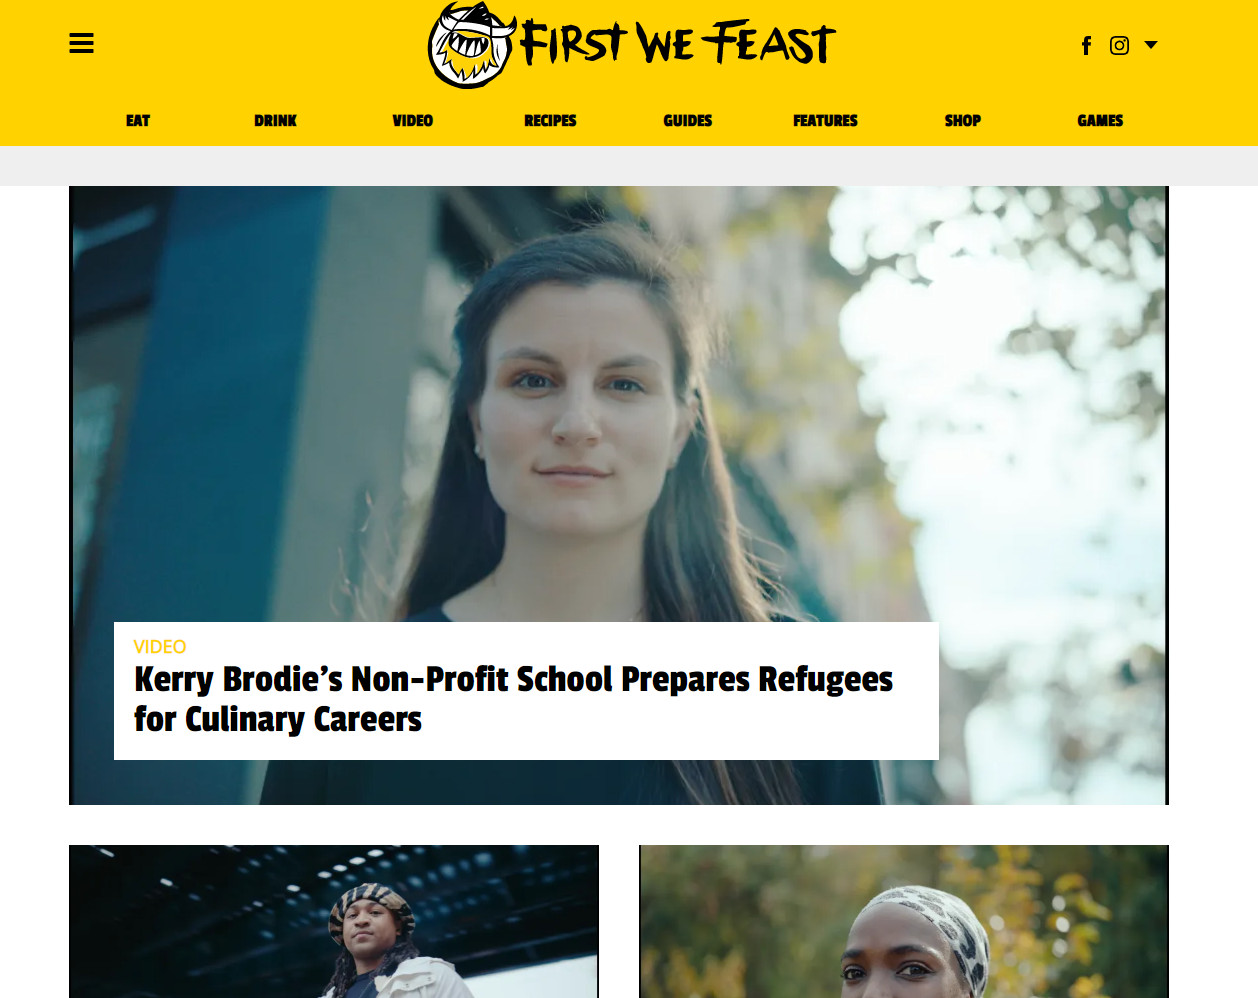 First We Feast is one of the best food websites for sharing food related news, culture, and entertainment